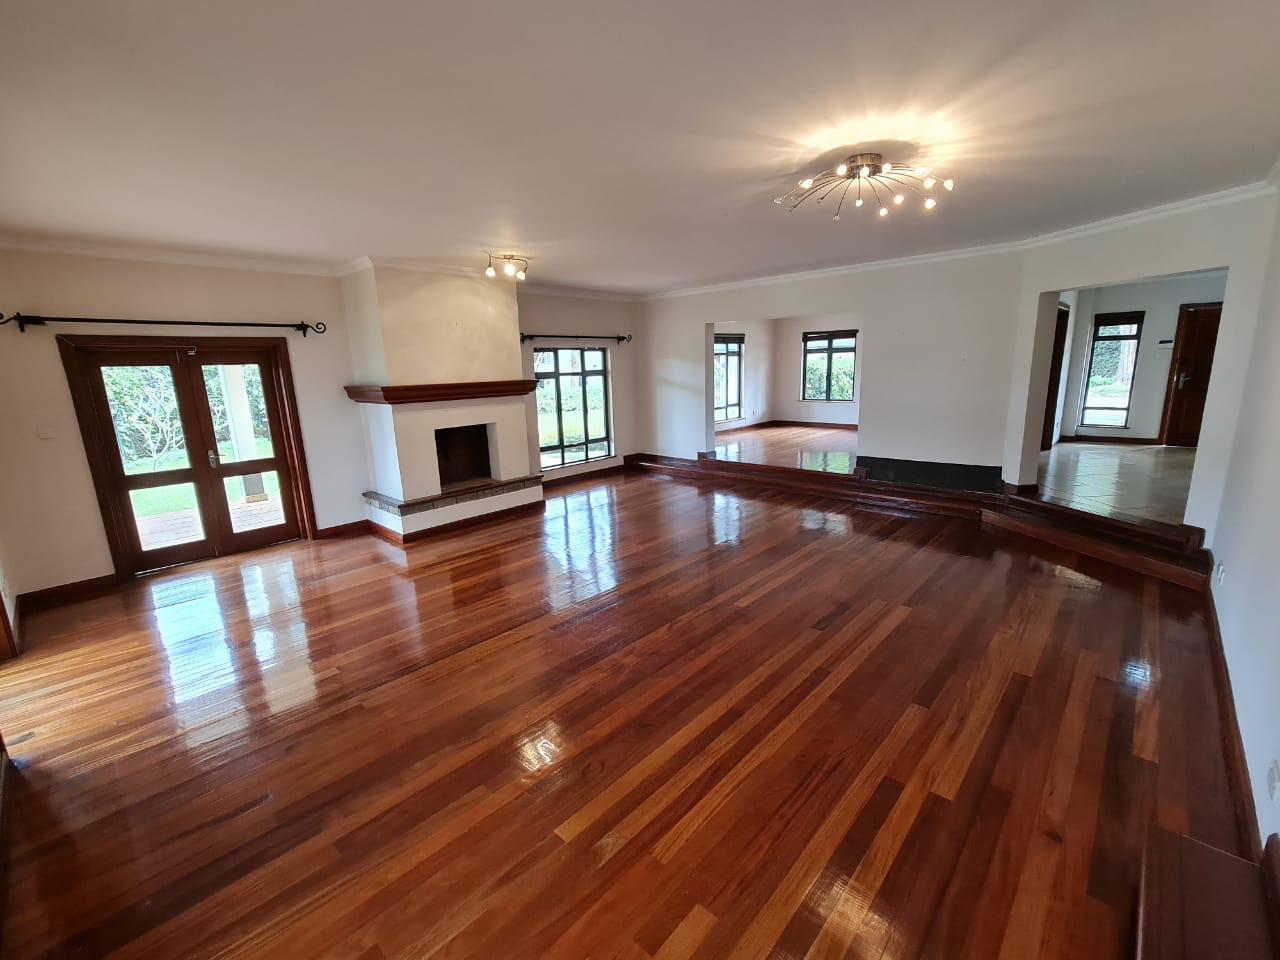 Lovely 4 bedroom Townhouse plus dsq for rent at Ksh330k in Westlands, ensuite, family room, office, detached dsq for 2, very well maintained and more amenities12